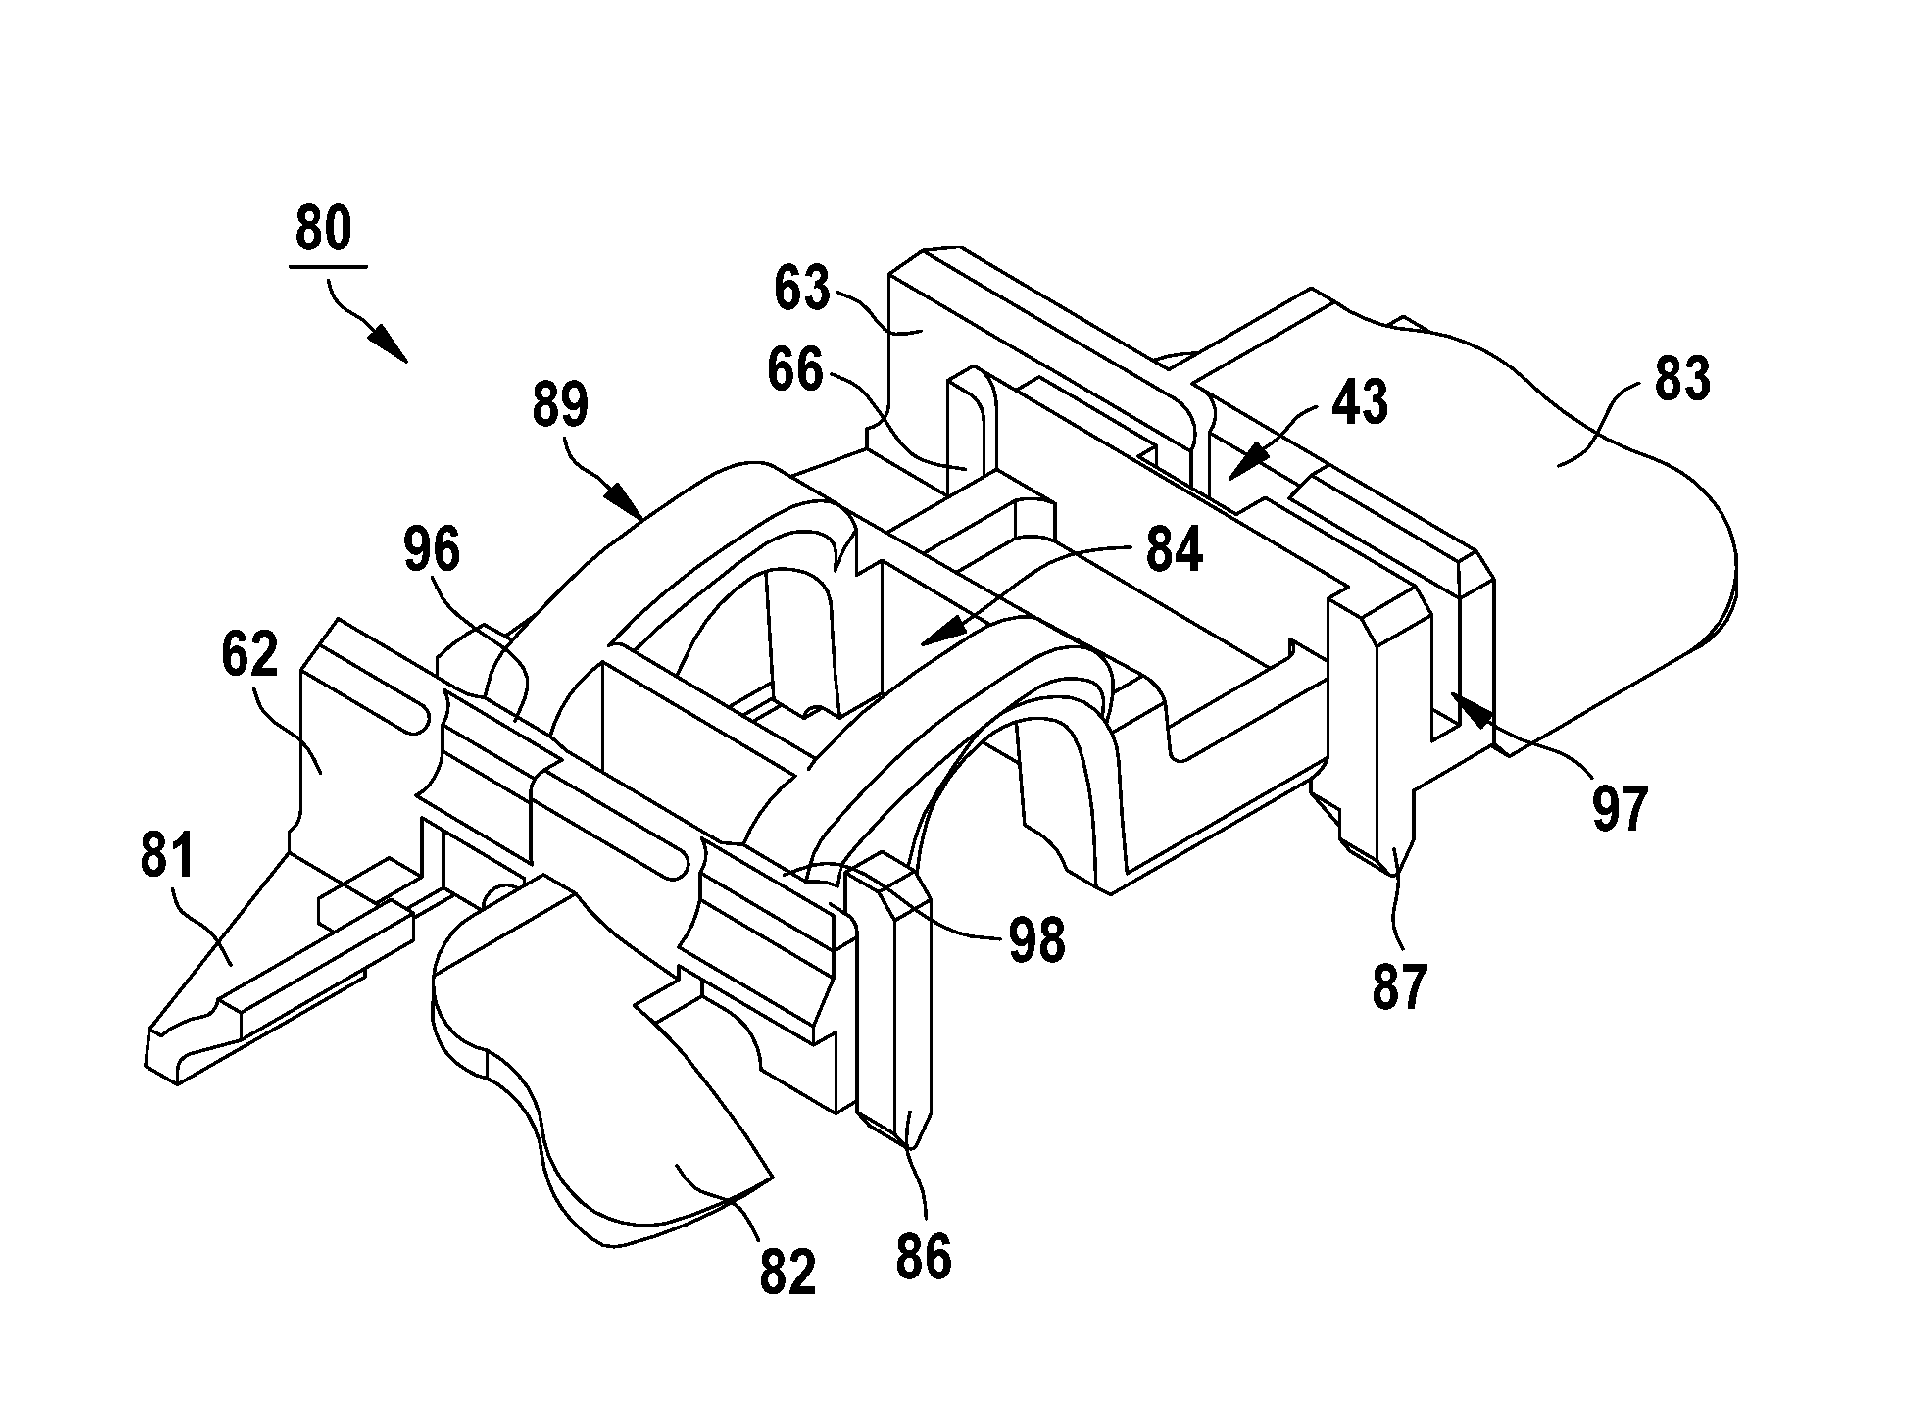 Wiper blade having connection component for linking to wiper arm